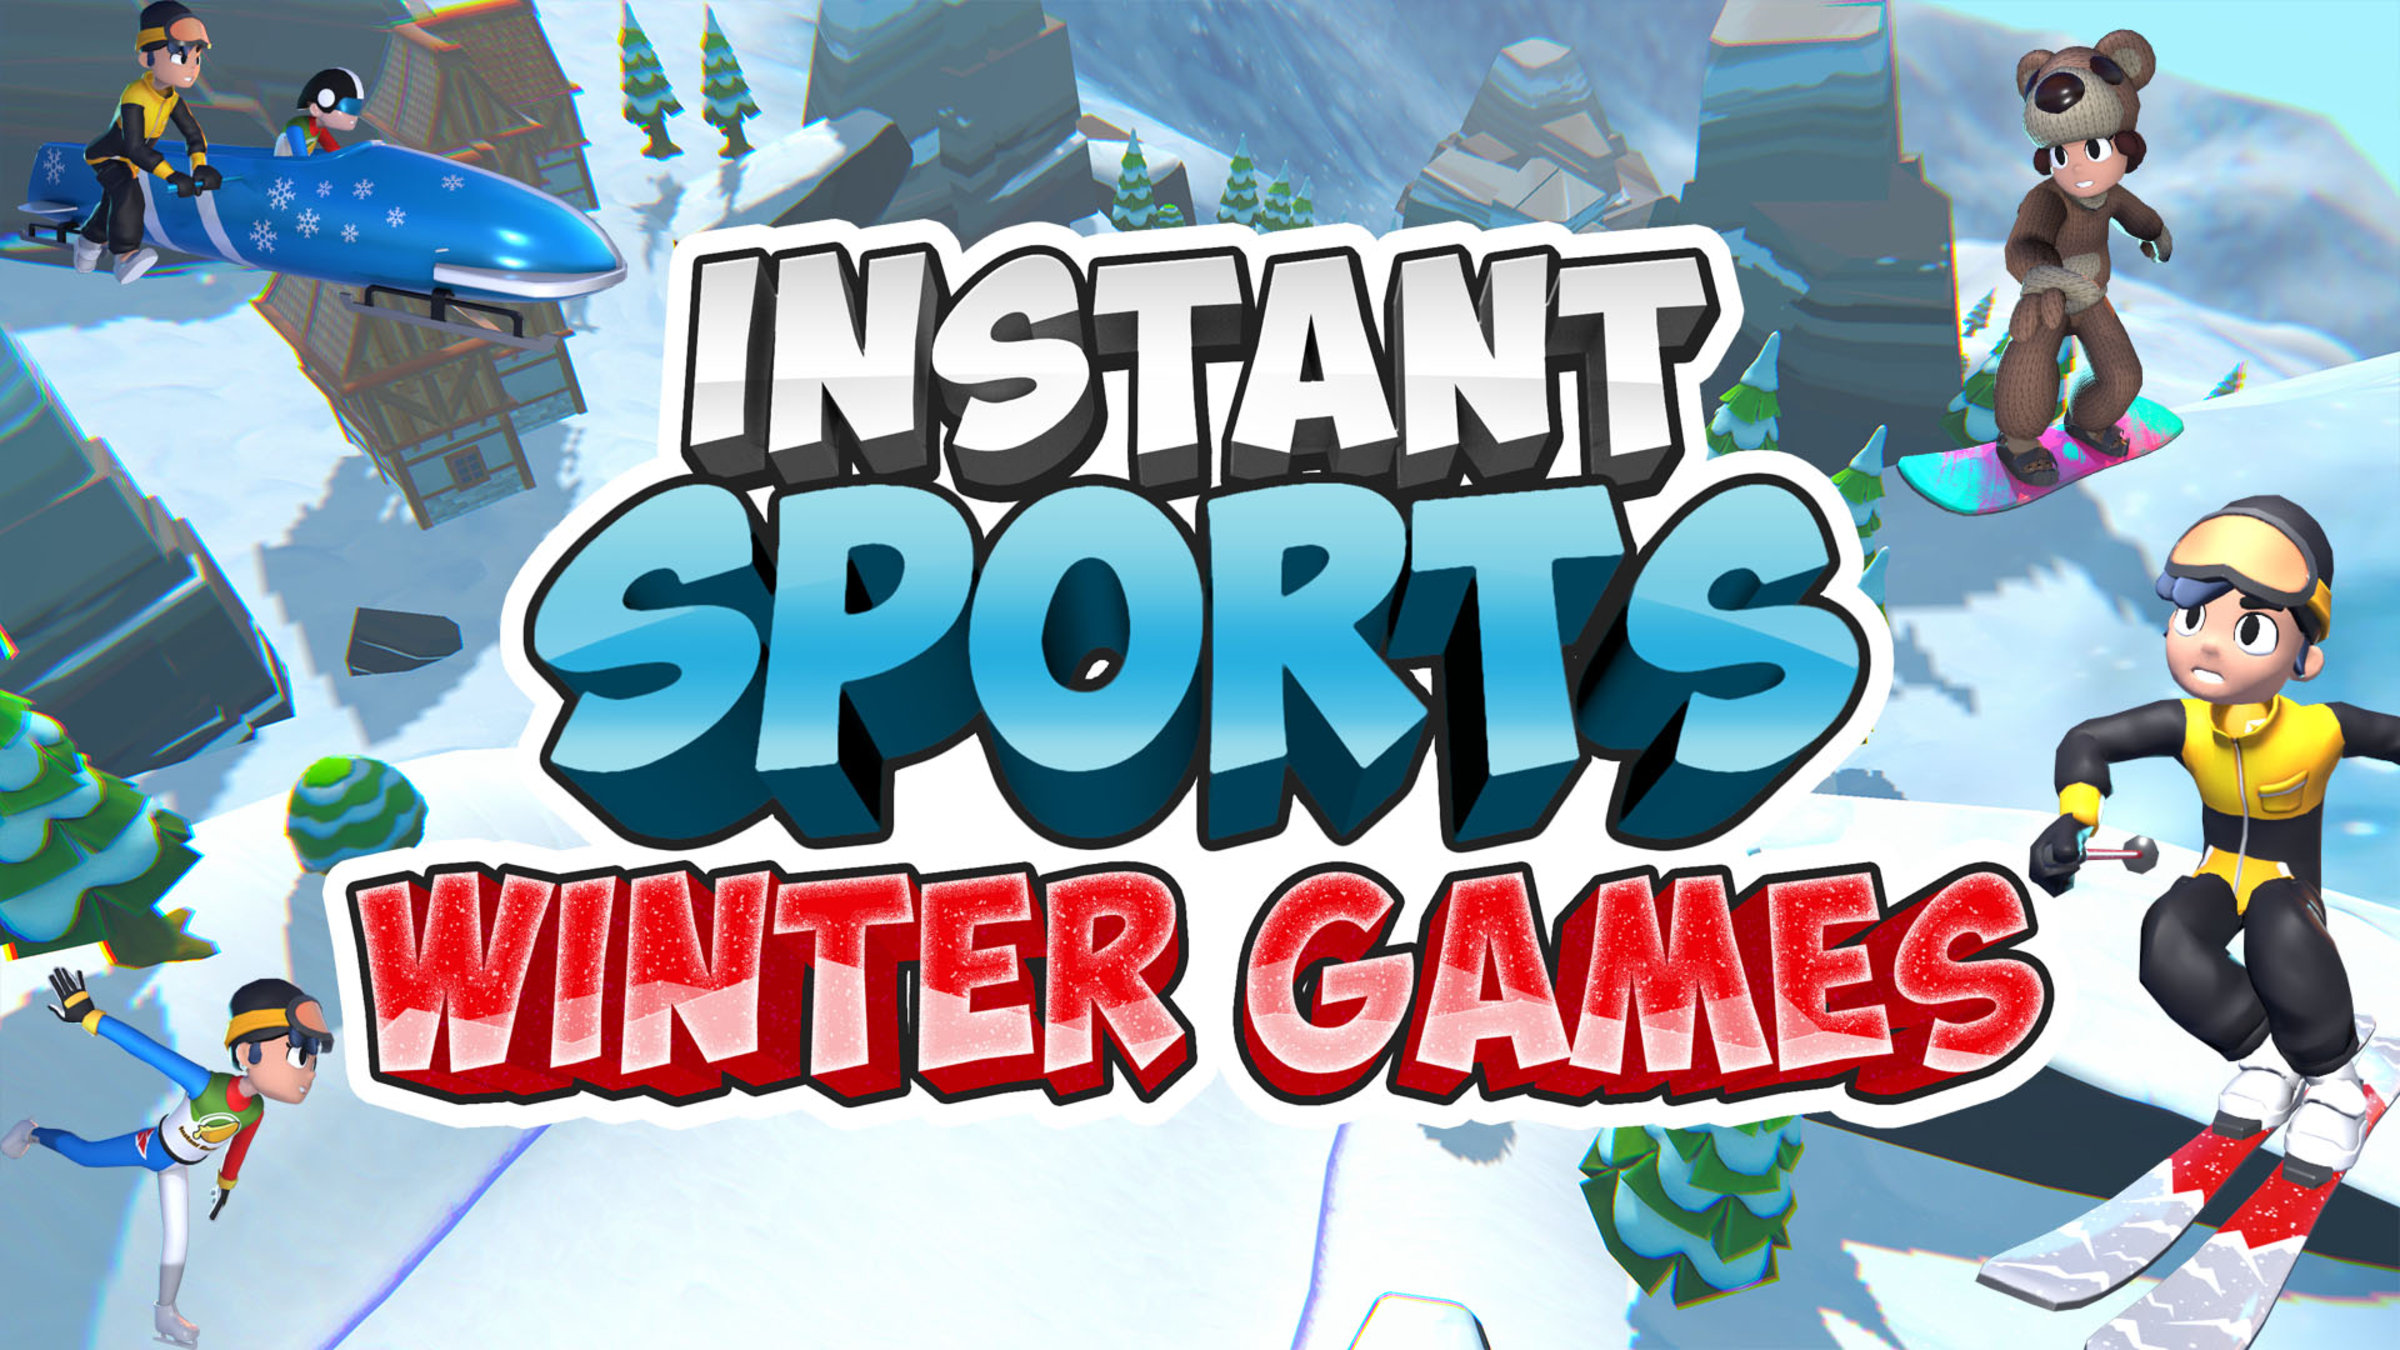 Site Sports for Games Switch Winter Instant - Official Nintendo Nintendo